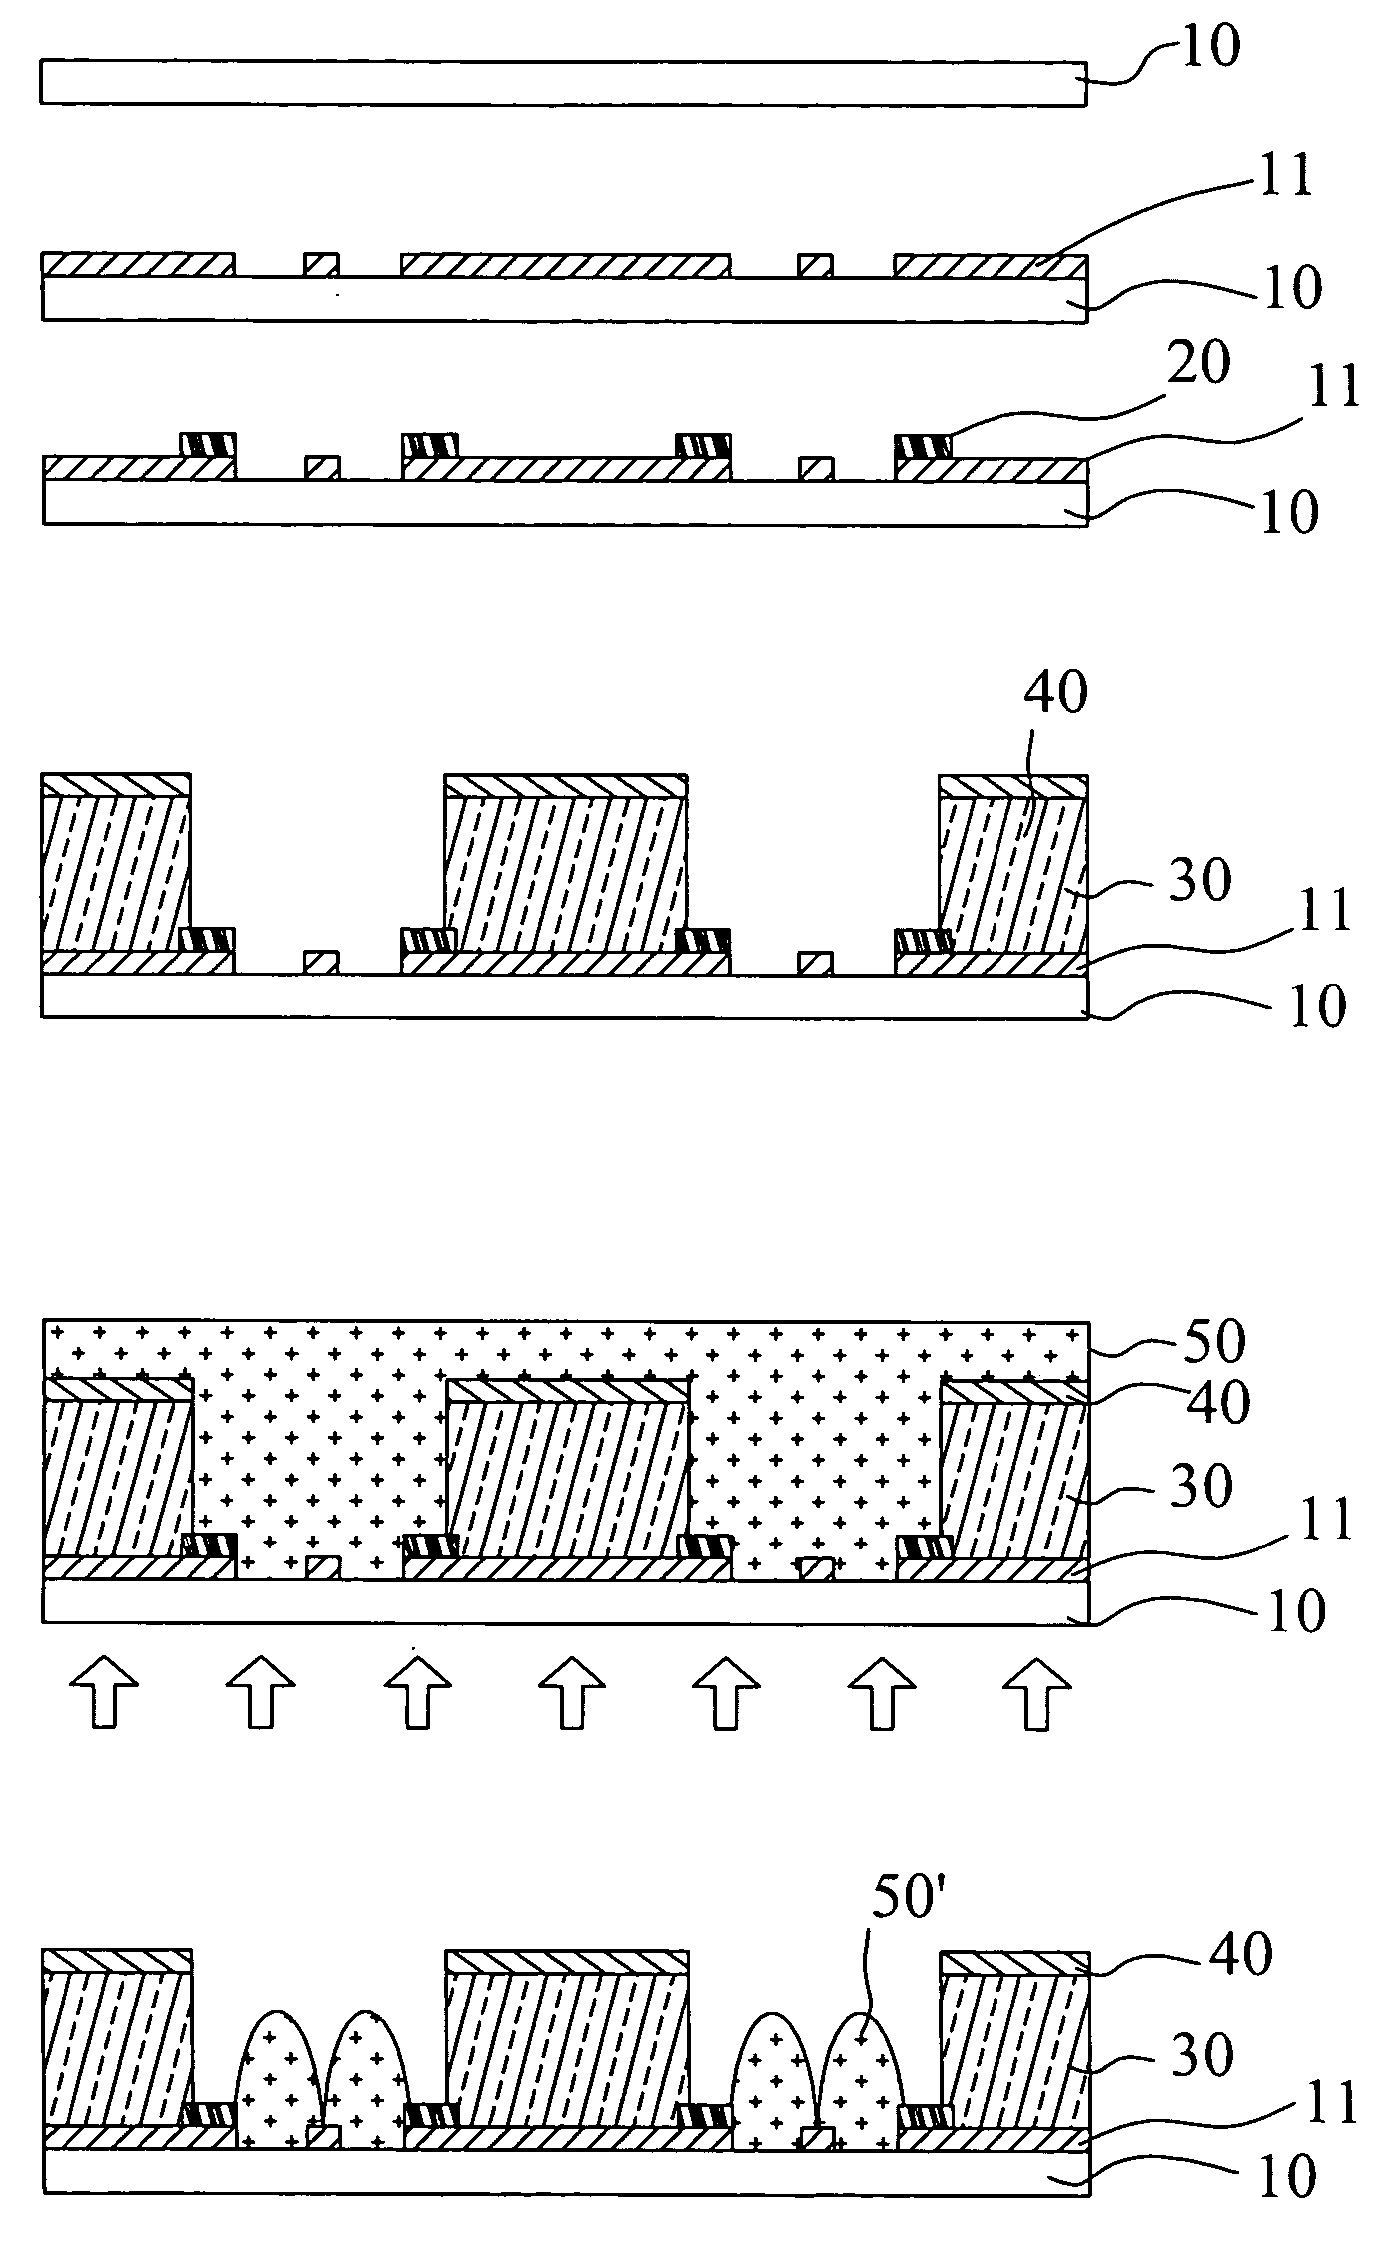 Carbon nanotube field emitter array and method for fabricating the same